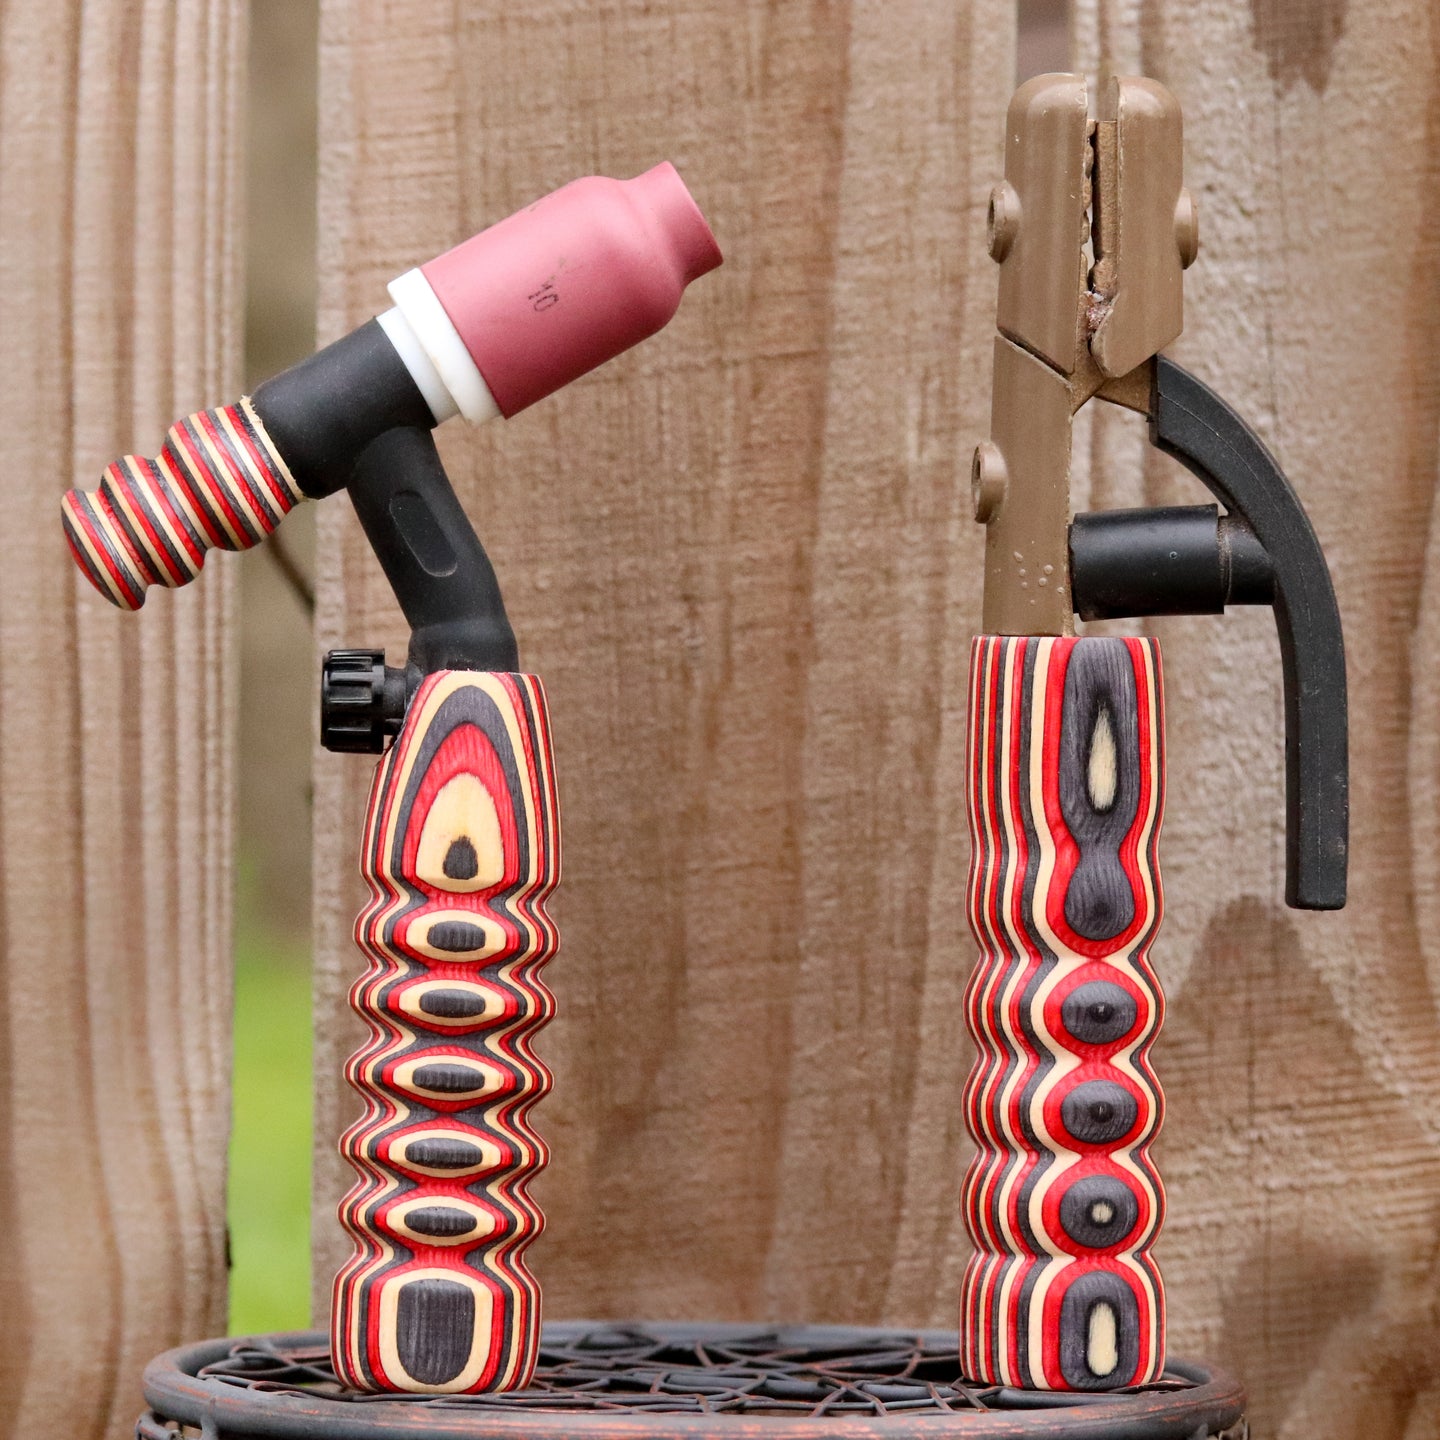 Combo - Stick and 150 amp TIG Torch Wood- Black, Cream white and Red. Free Backpcap